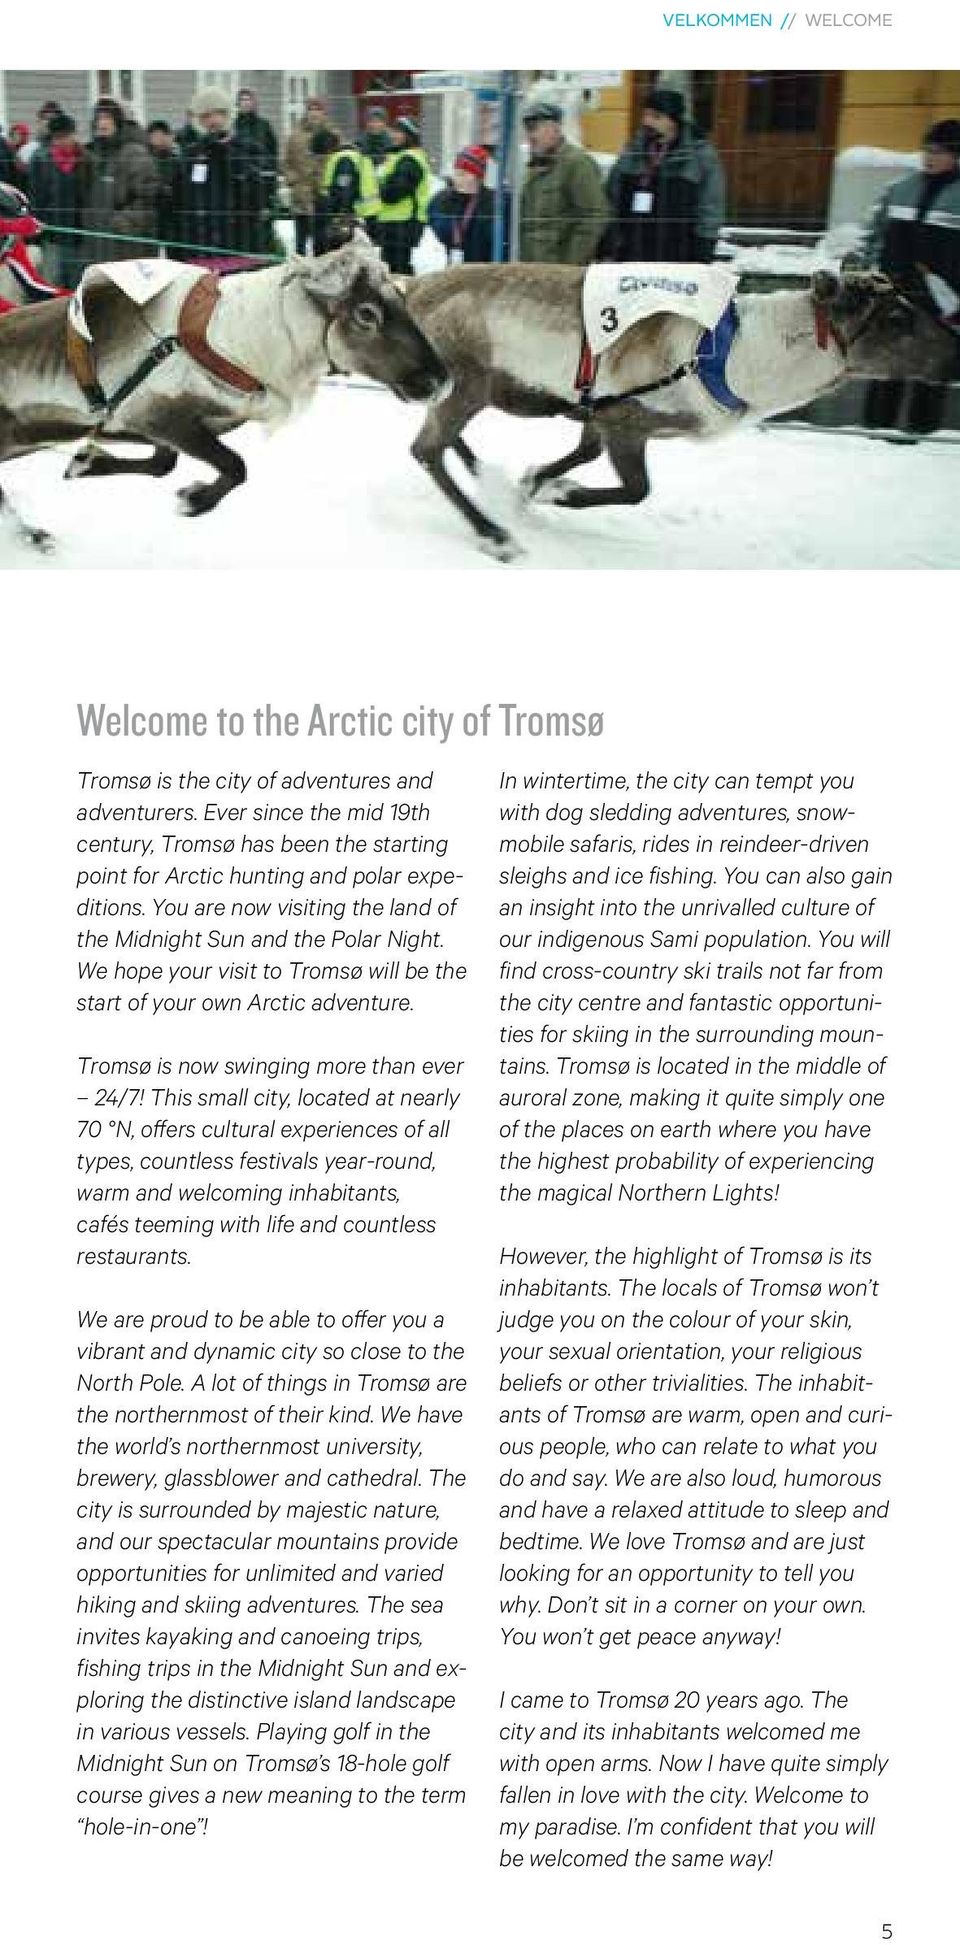 We hope your visit to Tromsø will be the start of your own Arctic adventure. Tromsø is now swinging more than ever 24/7!